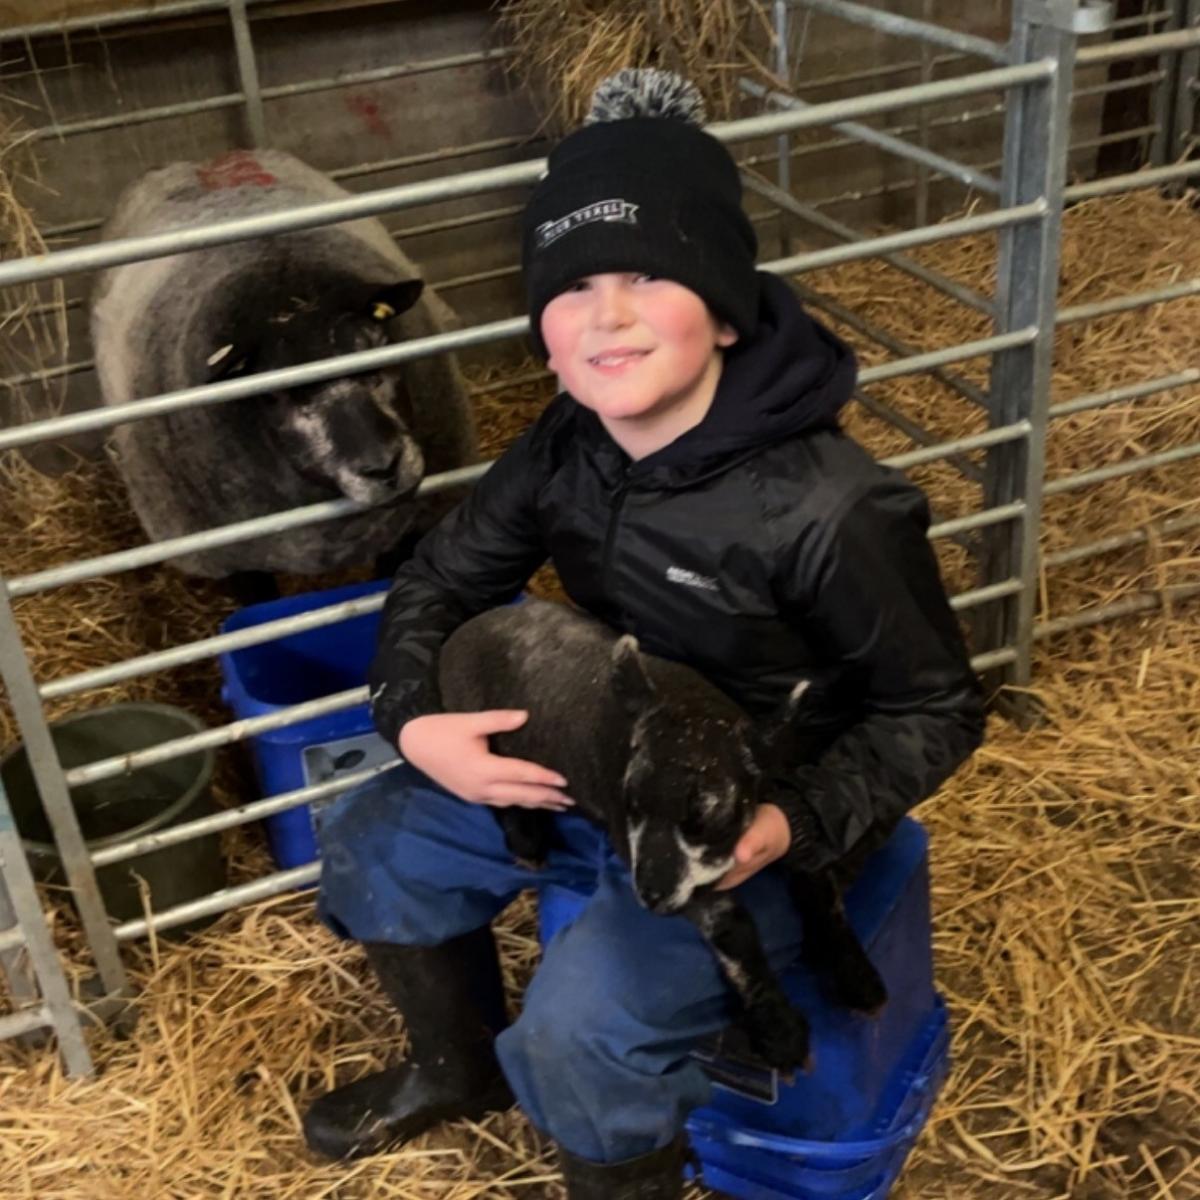 Karen Richmond - My son Louie Richmond is 8yrs old and loves being out on the farm with his uncle John, auntie Laura and papa Johnny cousar.